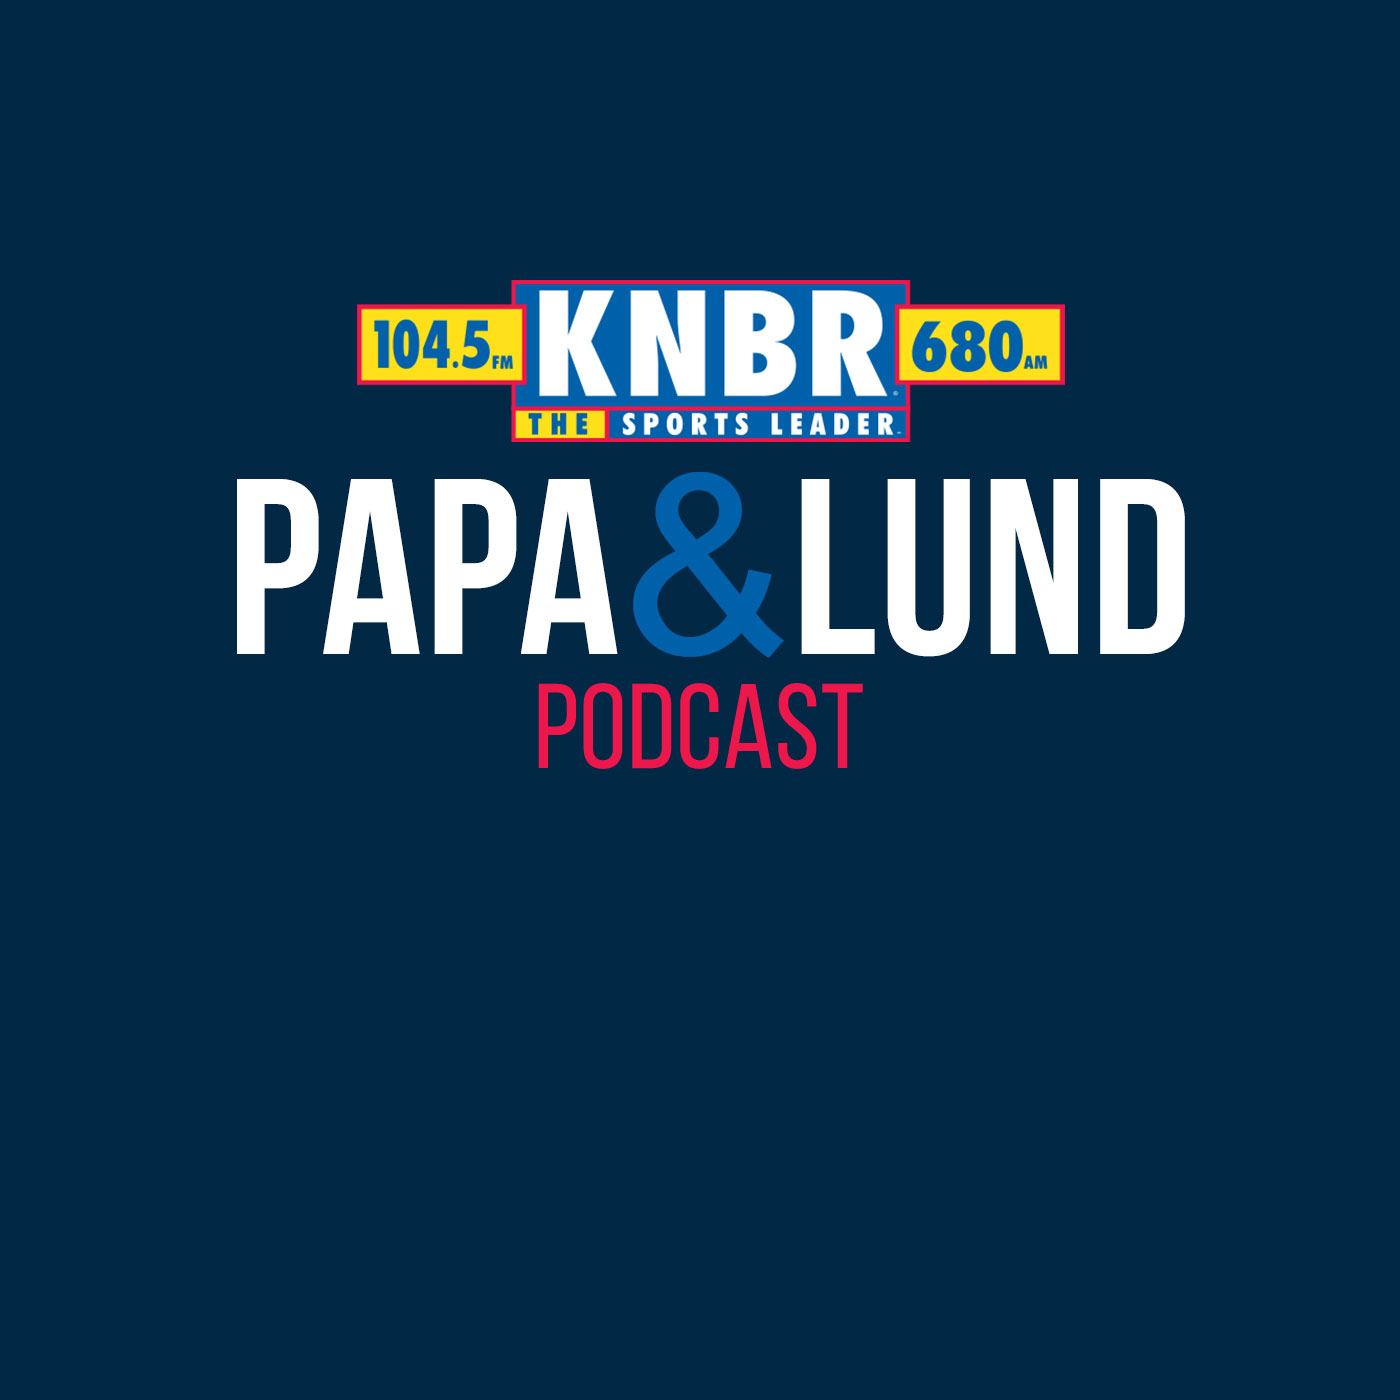 4-25 Papa & Lund Show - Hour 3 - Papa & Lund discuss the biggest needs for the 49ers entering the draft